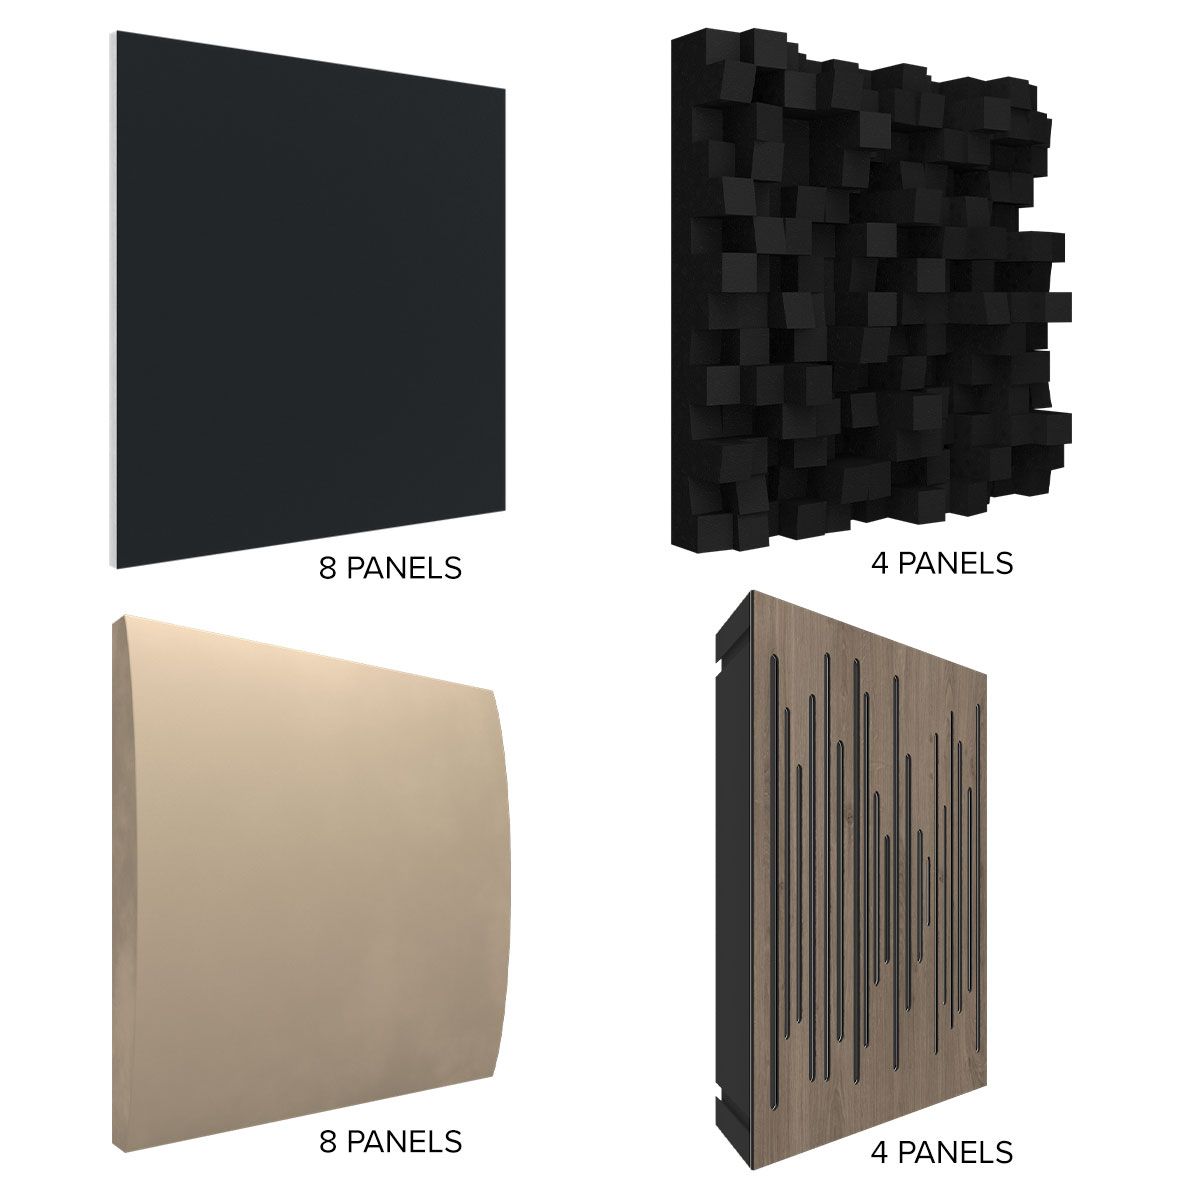 Vicoustic HiFi Acoustic Treatment Package for Medium-Sized Rooms, Panel Breakdown